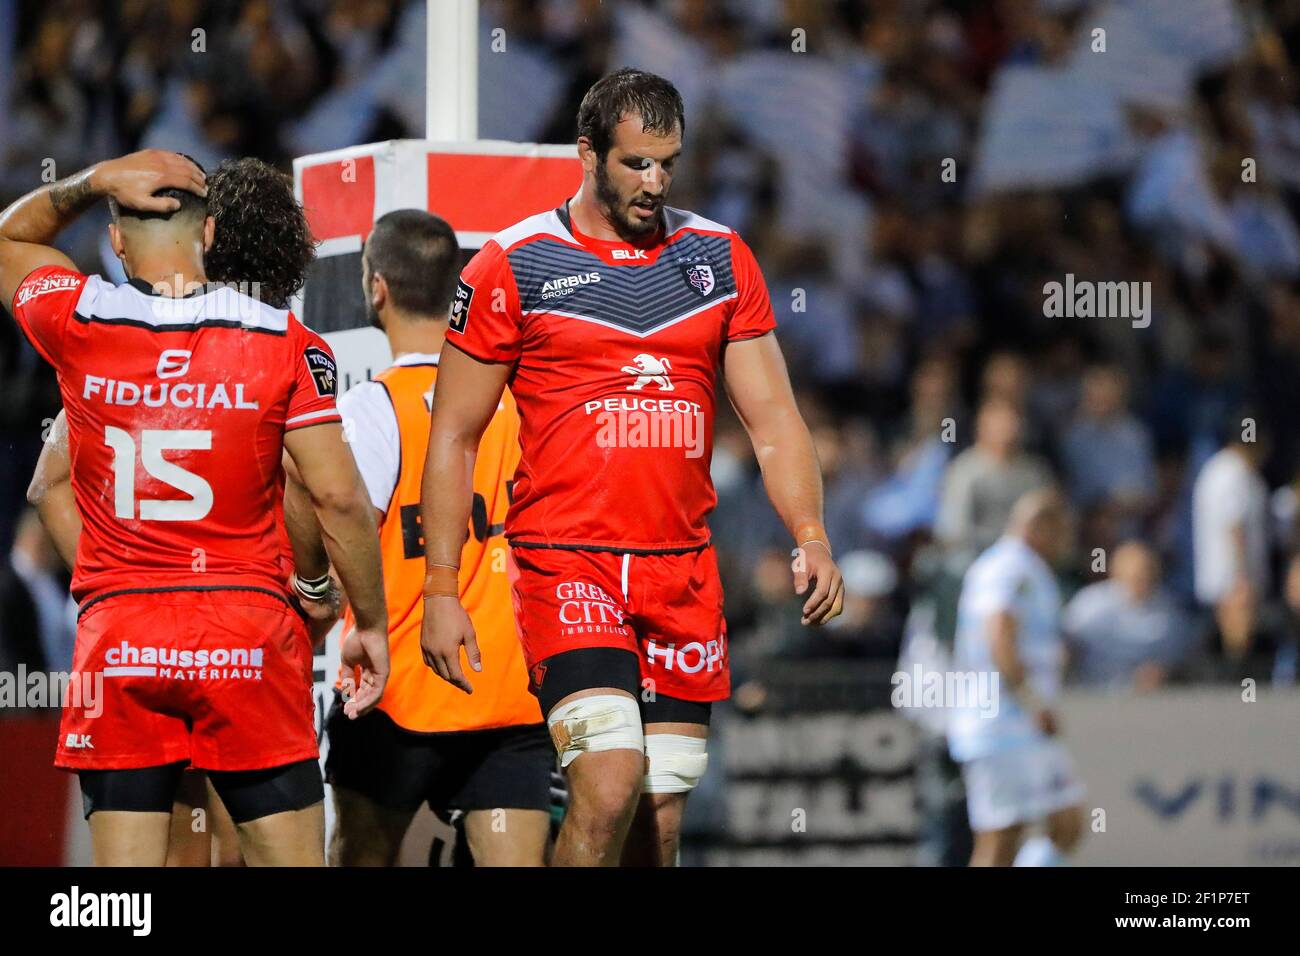 Yoann MAESTRI (Stade Toulousain) during the French Championship Top 14  Rugby Union match between Racing 92